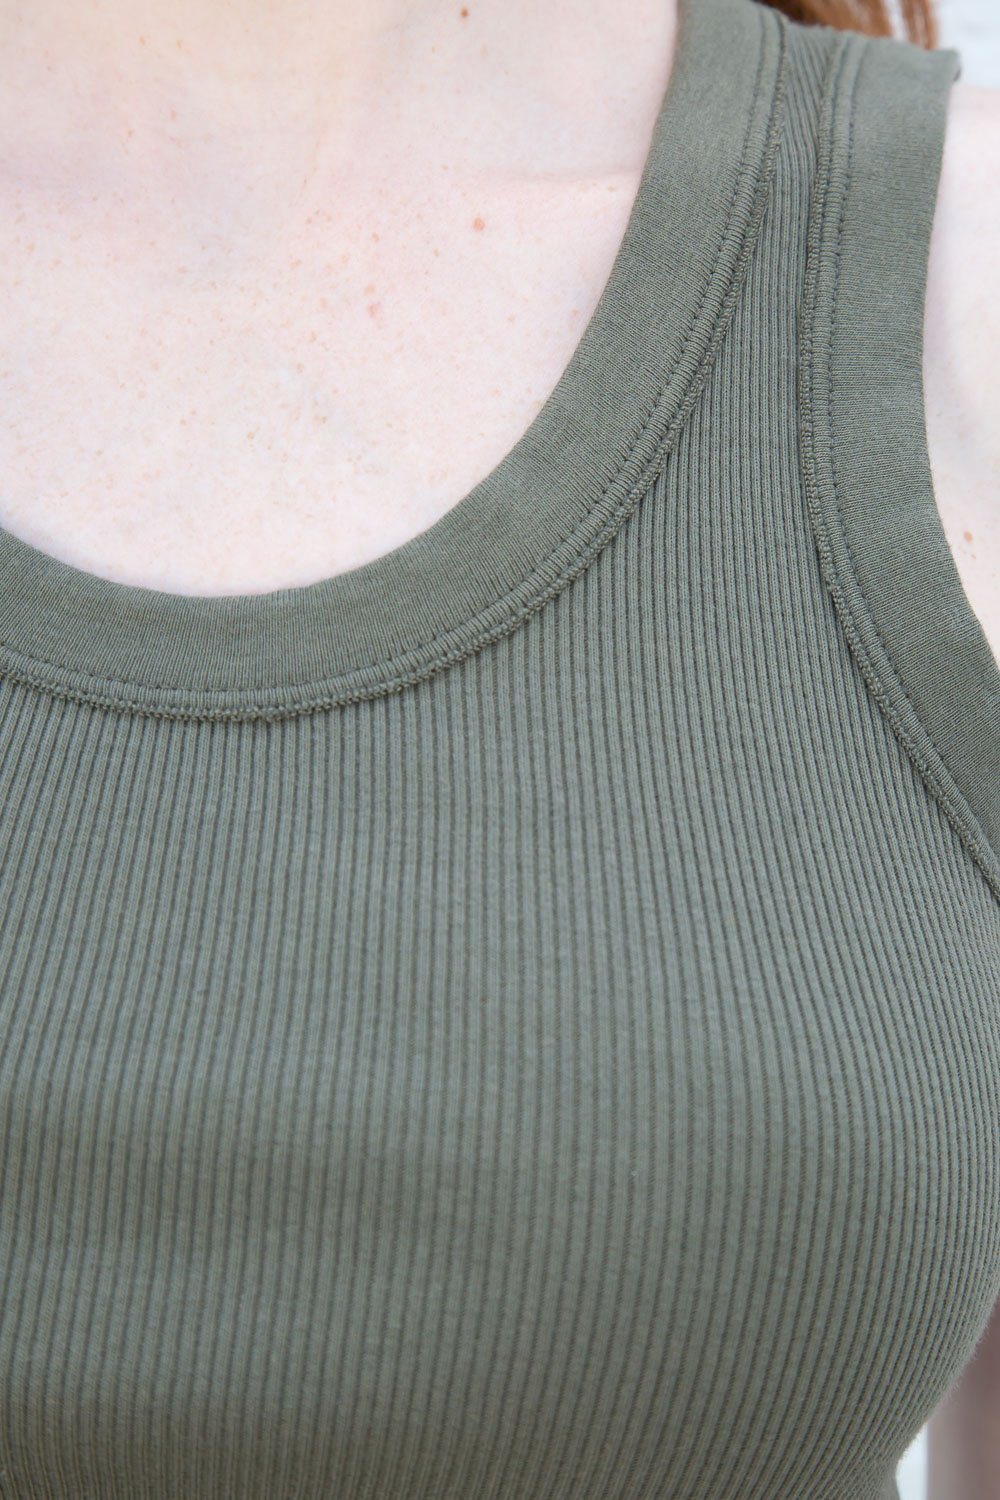 Brandy Melville NWT Connor tank green one size Size undefined